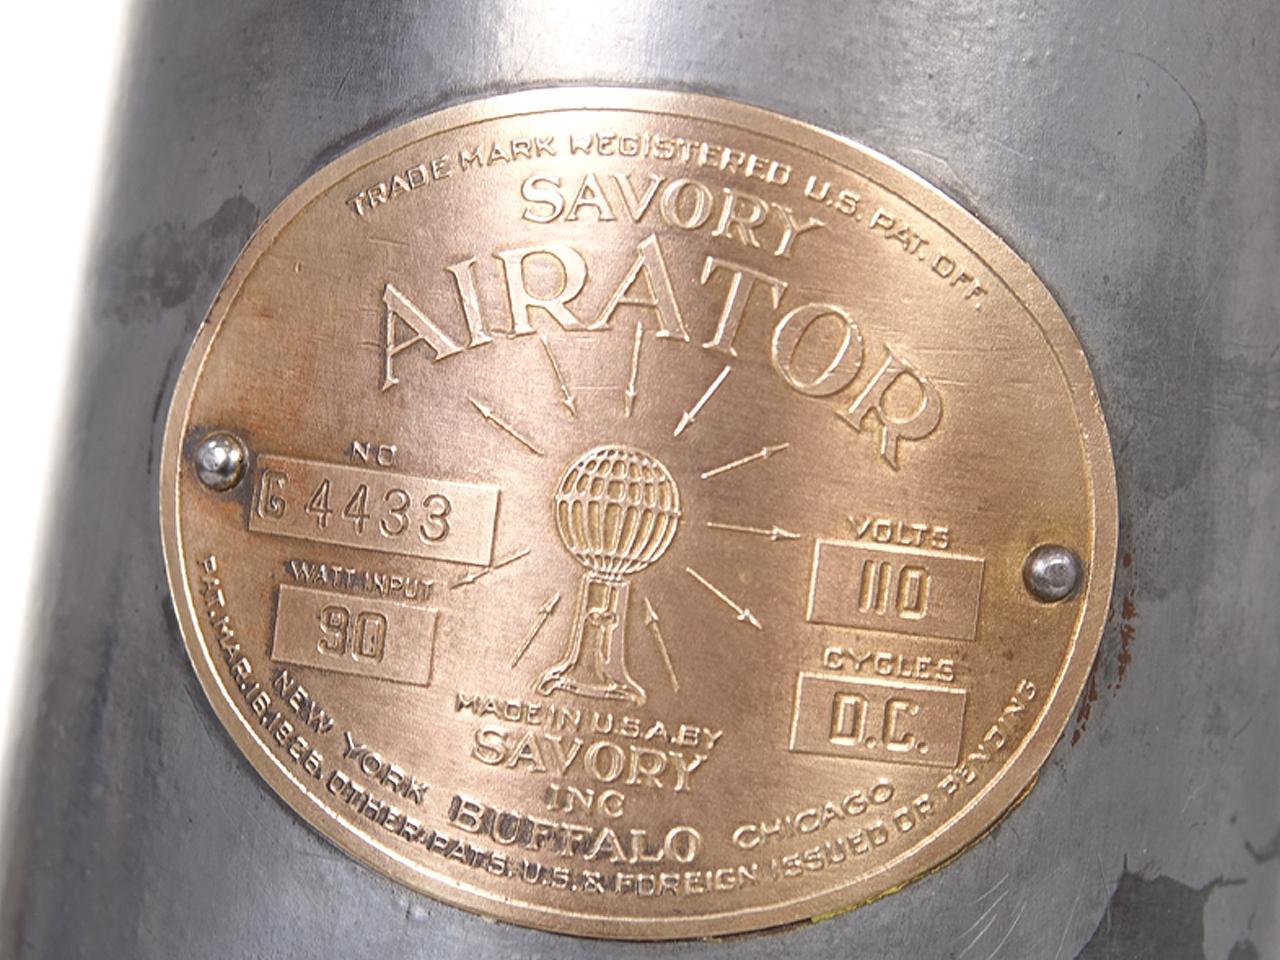 This vintage cast iron bankers fan Signed Savory Airator. The company states that the horizontal blades blow the air upwards, so it will not disturb any papers on a desk or table. It was made during the 1920s. and is in perfect working order. The